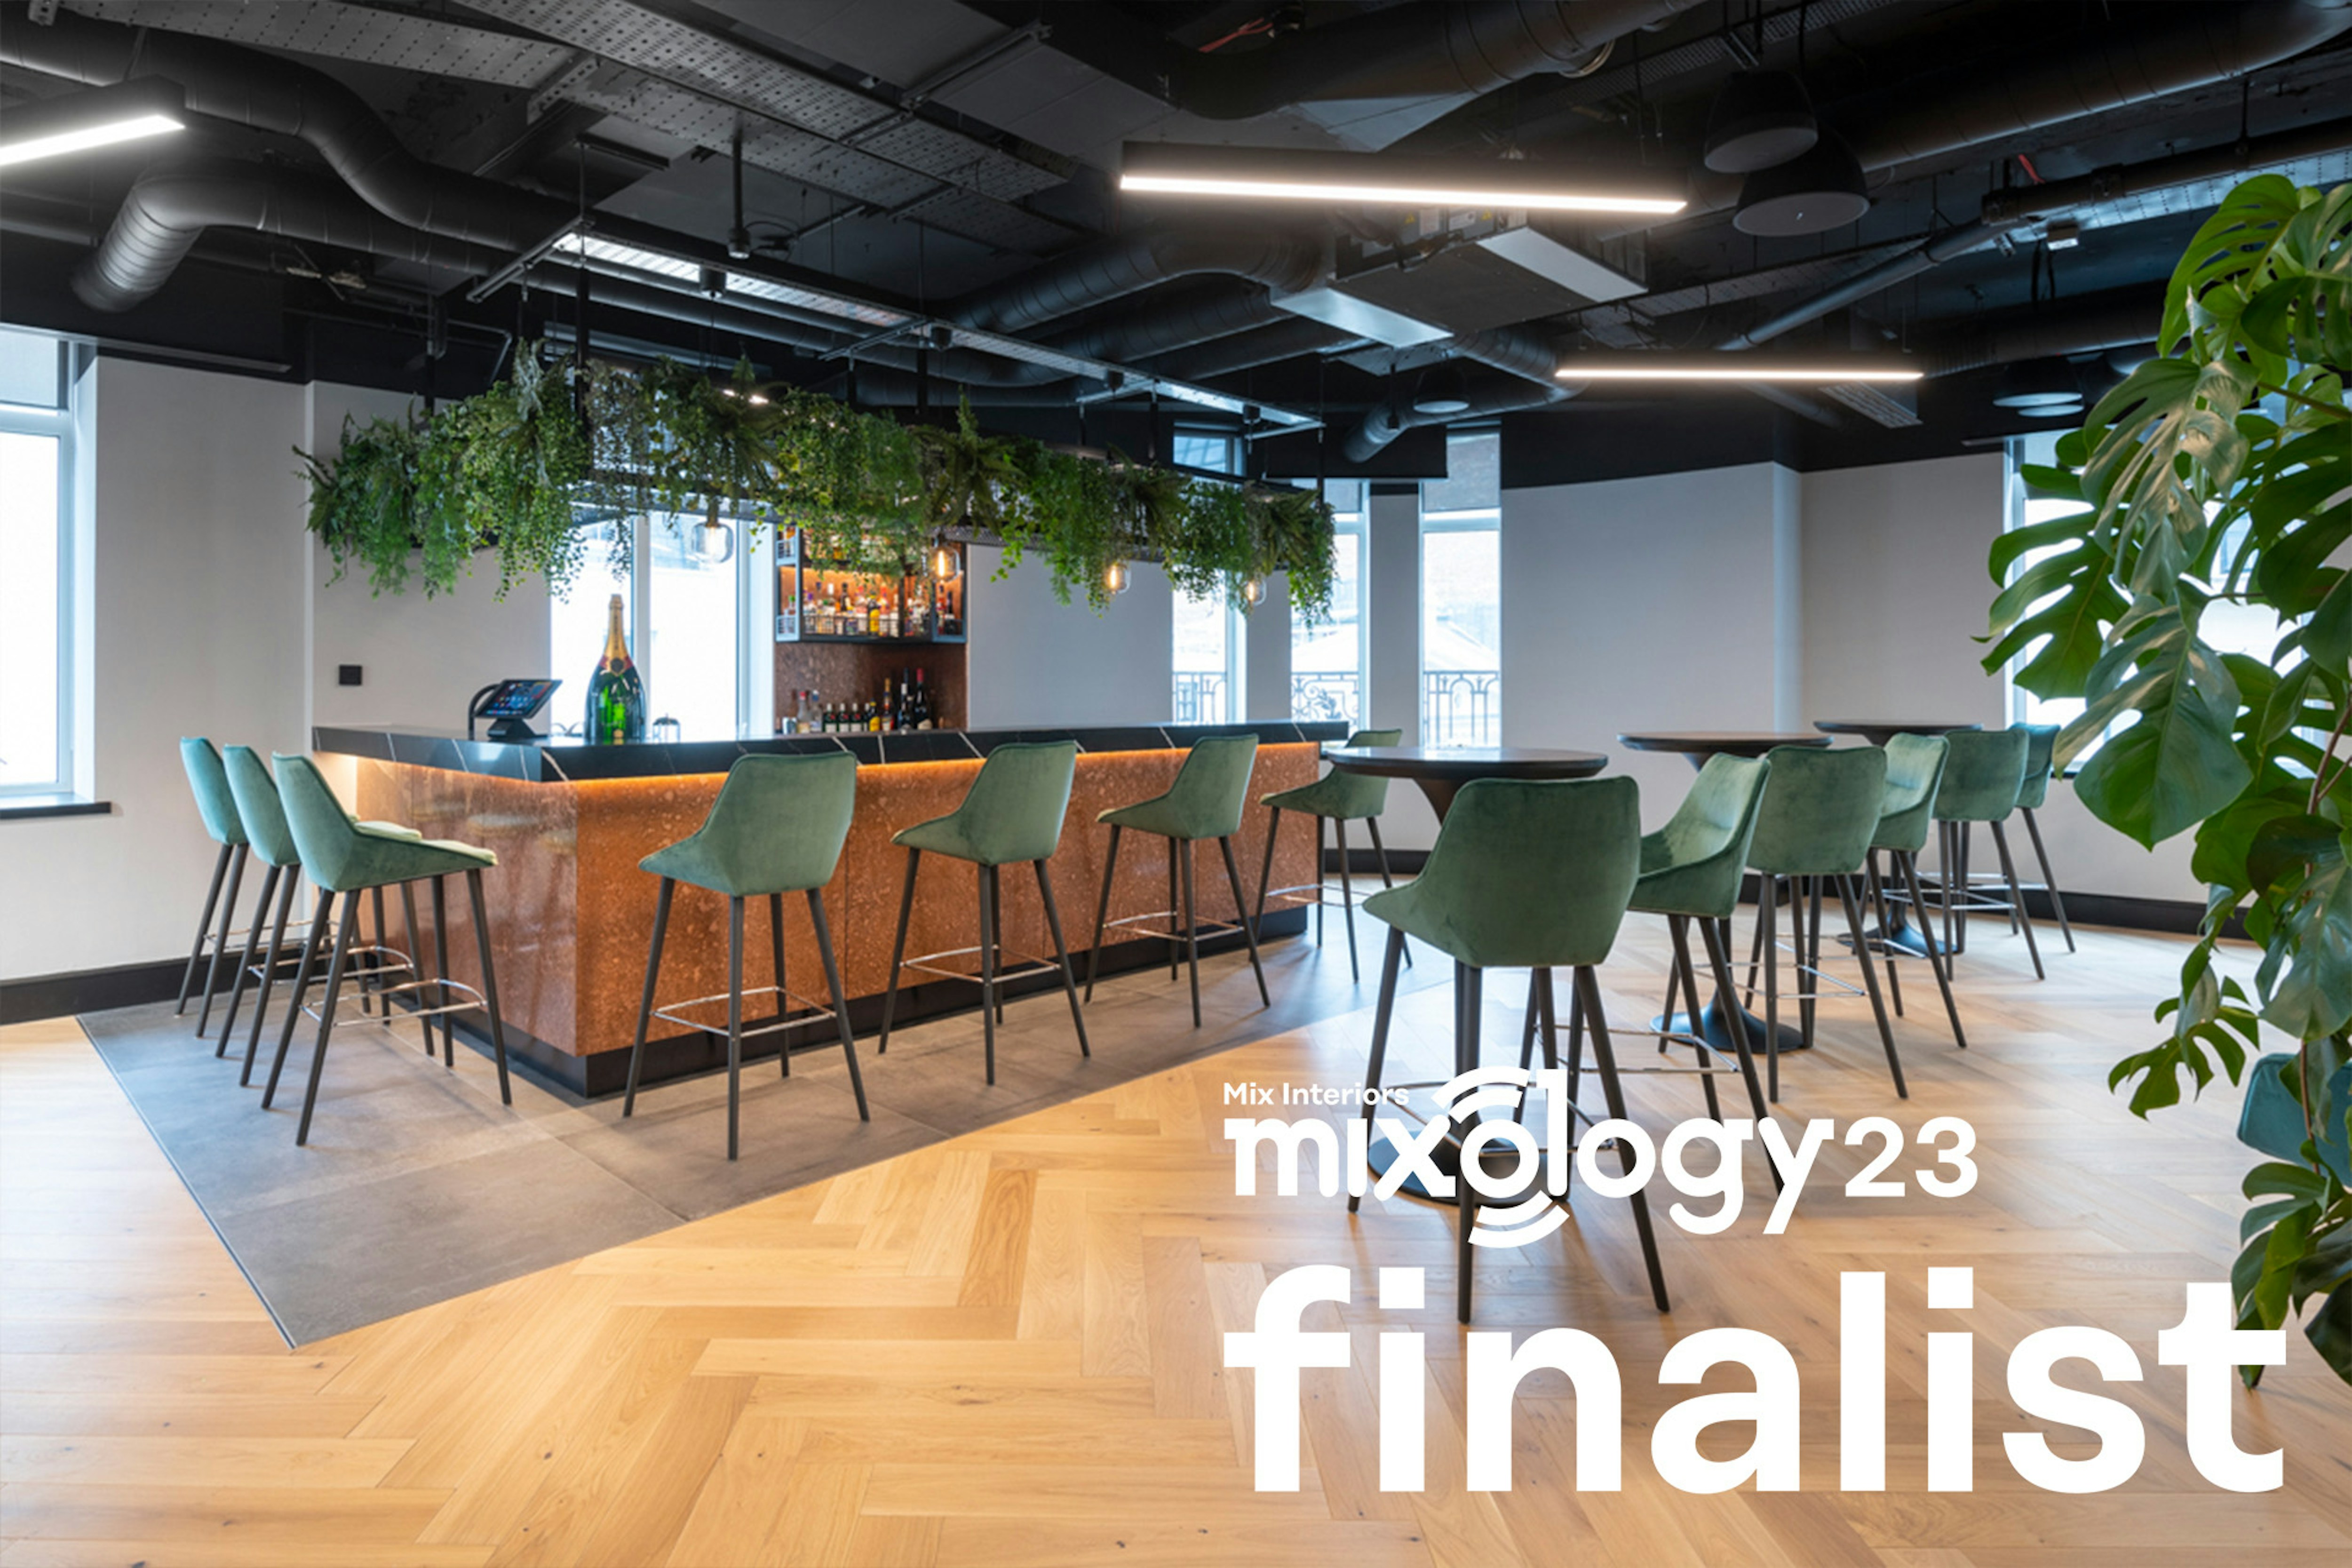 Mixology 23 Awards - Design & Build Project of the Year Finalist